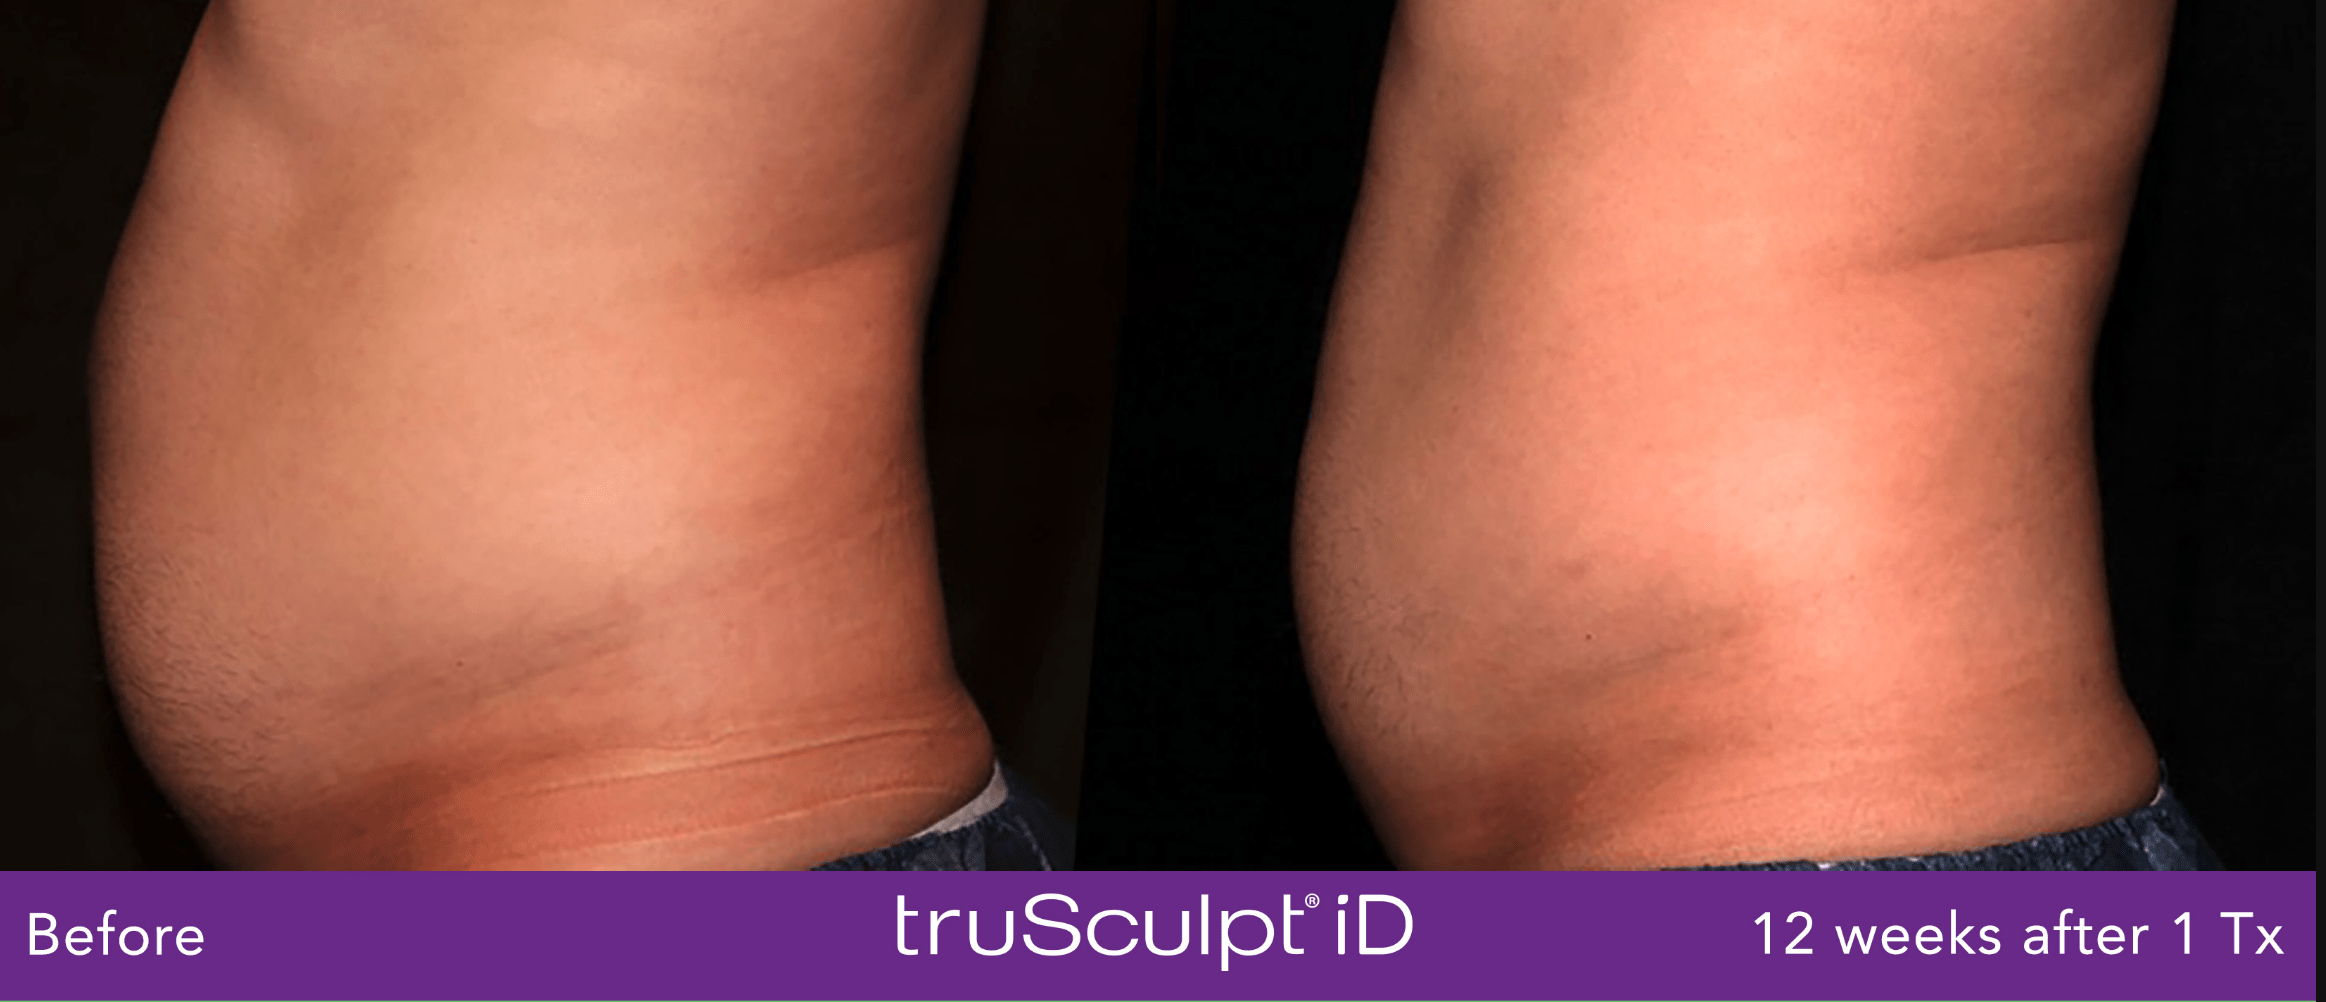 TruSculpt iD Before and After photo by Awazul Wellness & Weight Loss in Kihei, HI